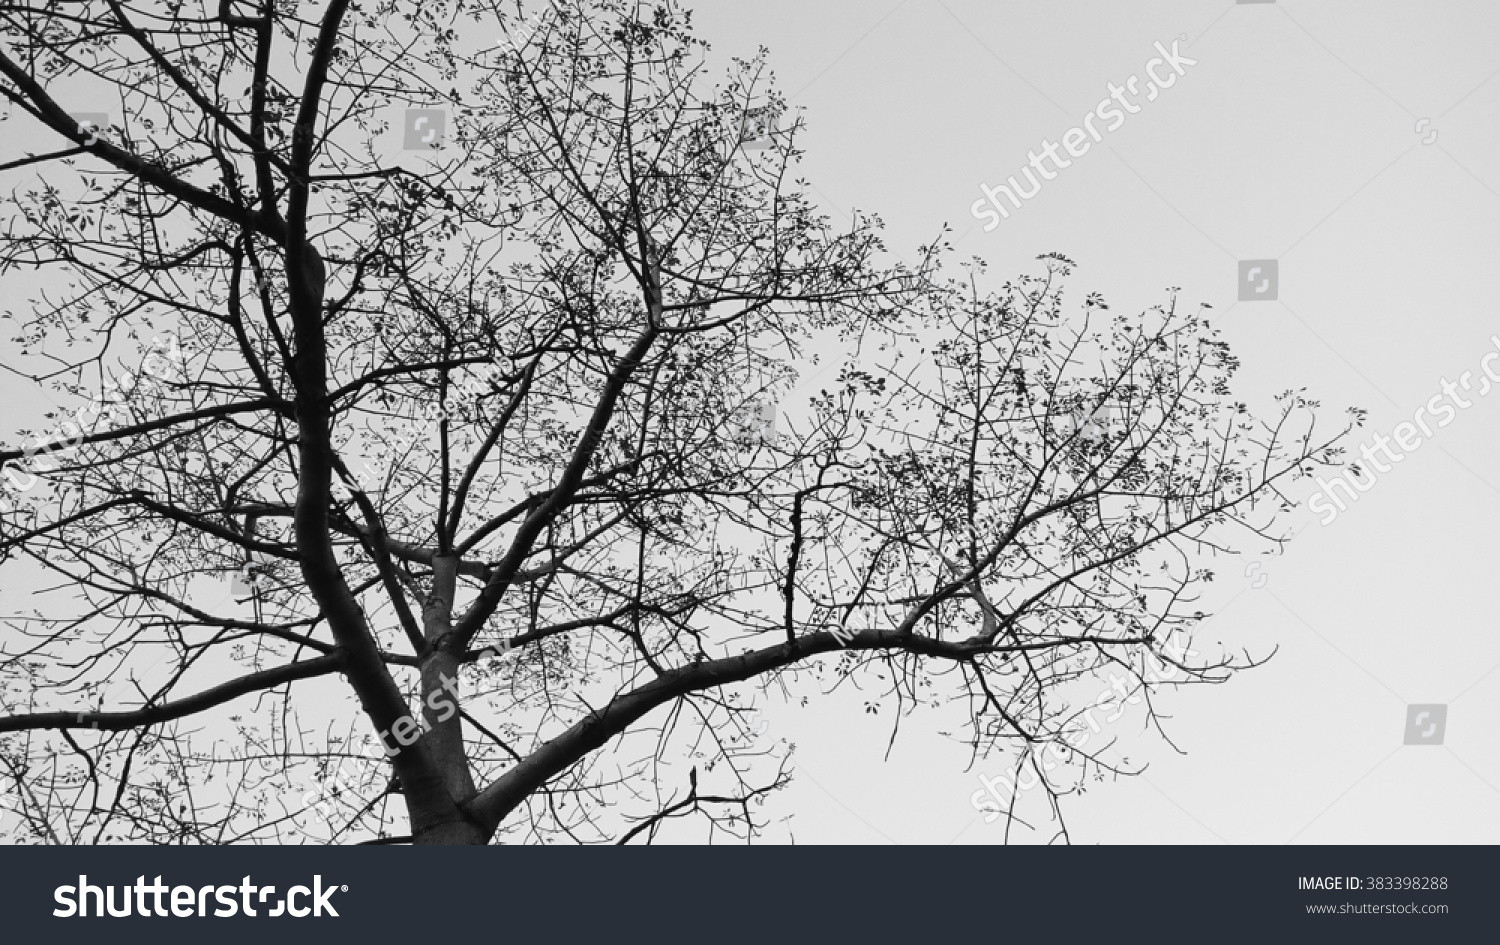 Tree Branches Stock Photo 383398288 - Shutterstock